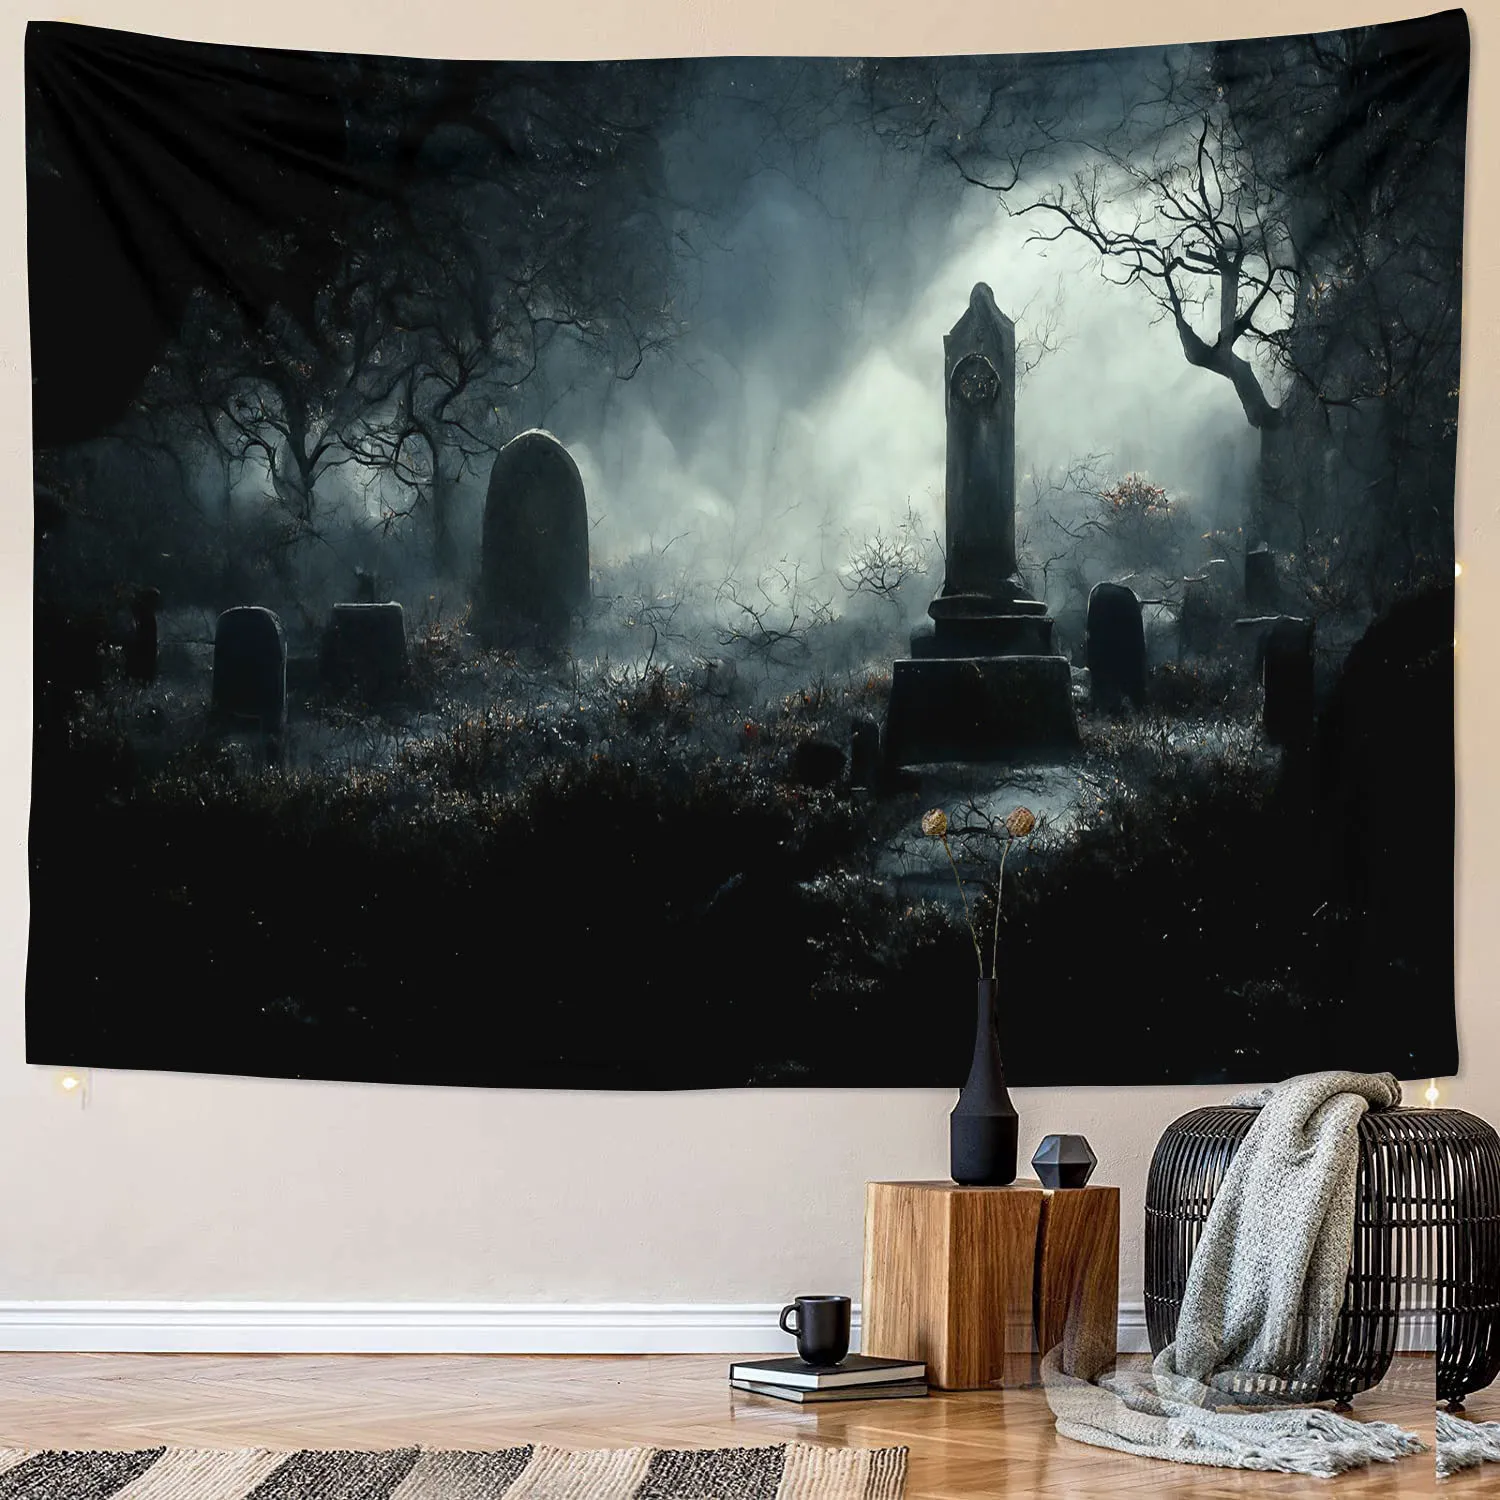 

6 sizes Halloween Tapestry Night Castle Graveyard Tapestry Horror Doomsday Wall Hanging Bedroom Dorm Living Room Home Decor